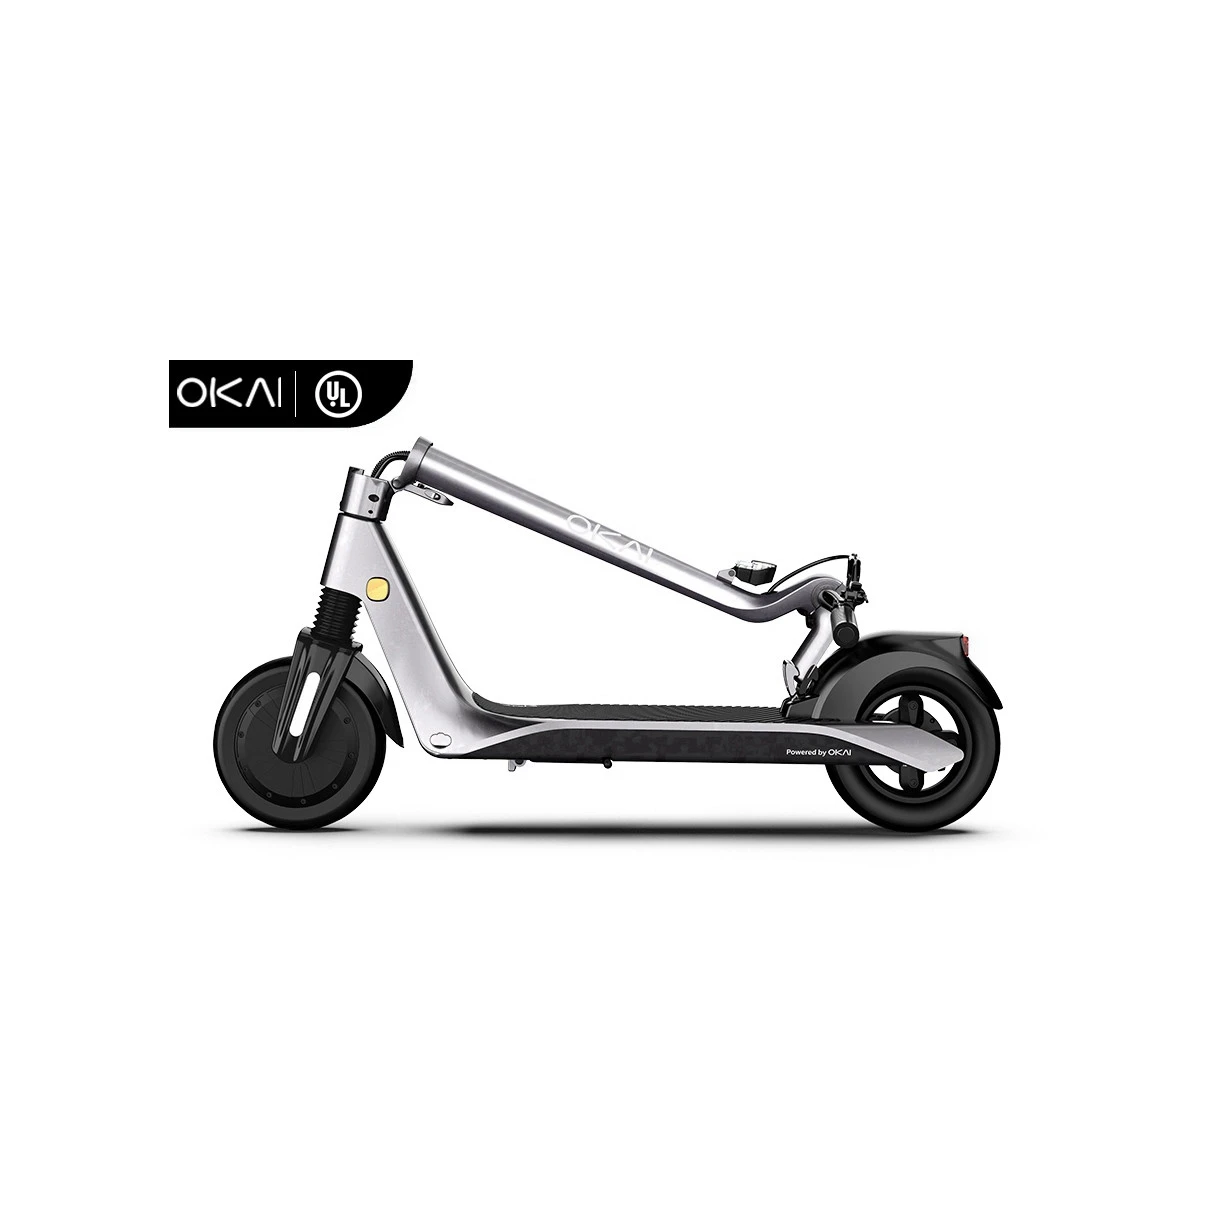 OKAI ES500 36V Professional Manufacture Luxury Cheap Electric Bike Electric Scooter